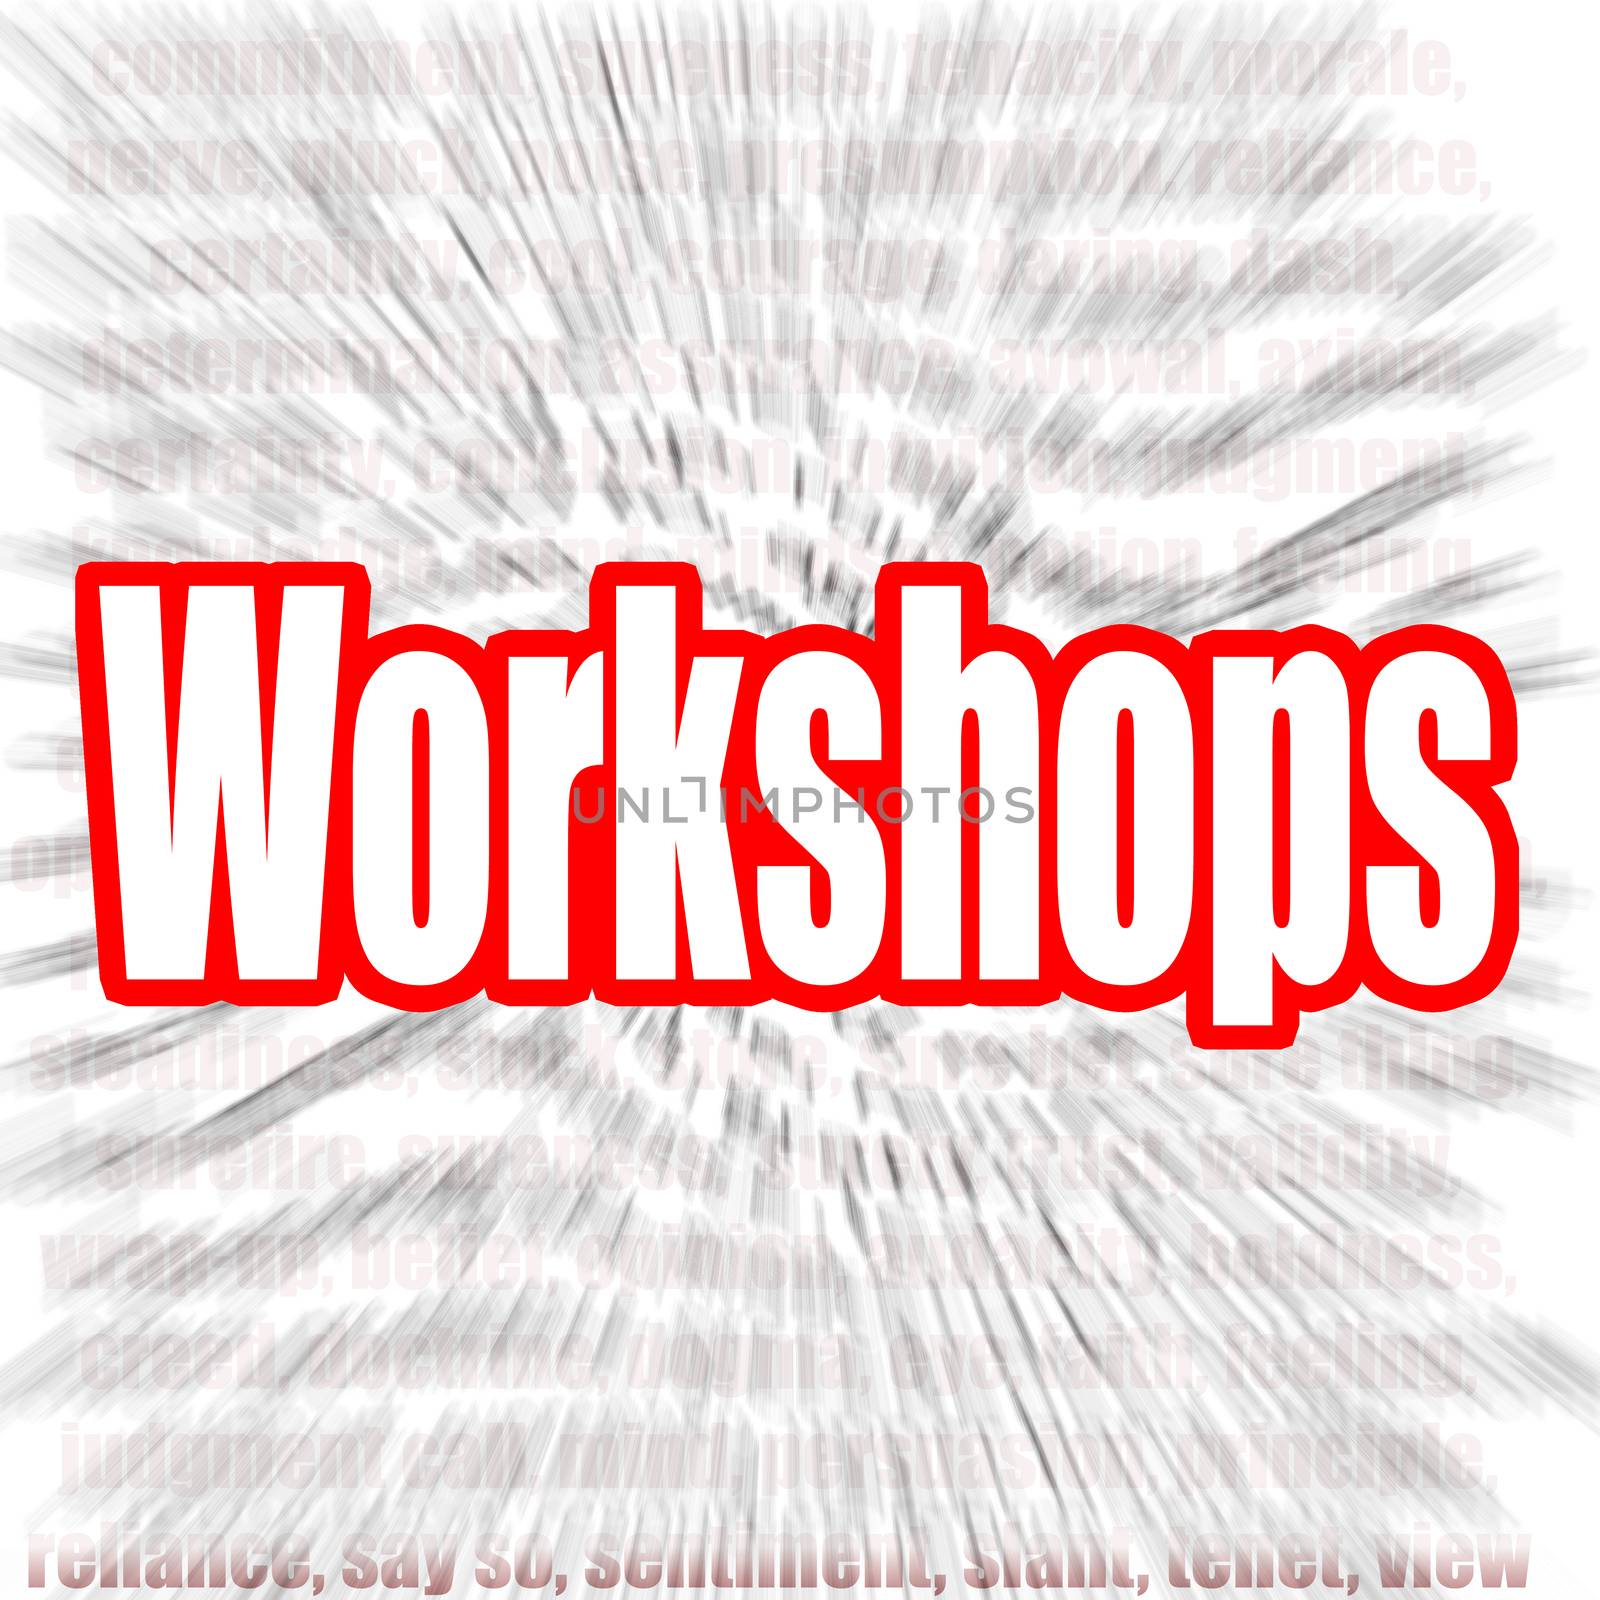 Workshops word with zoom in effect as background, 3D rendering